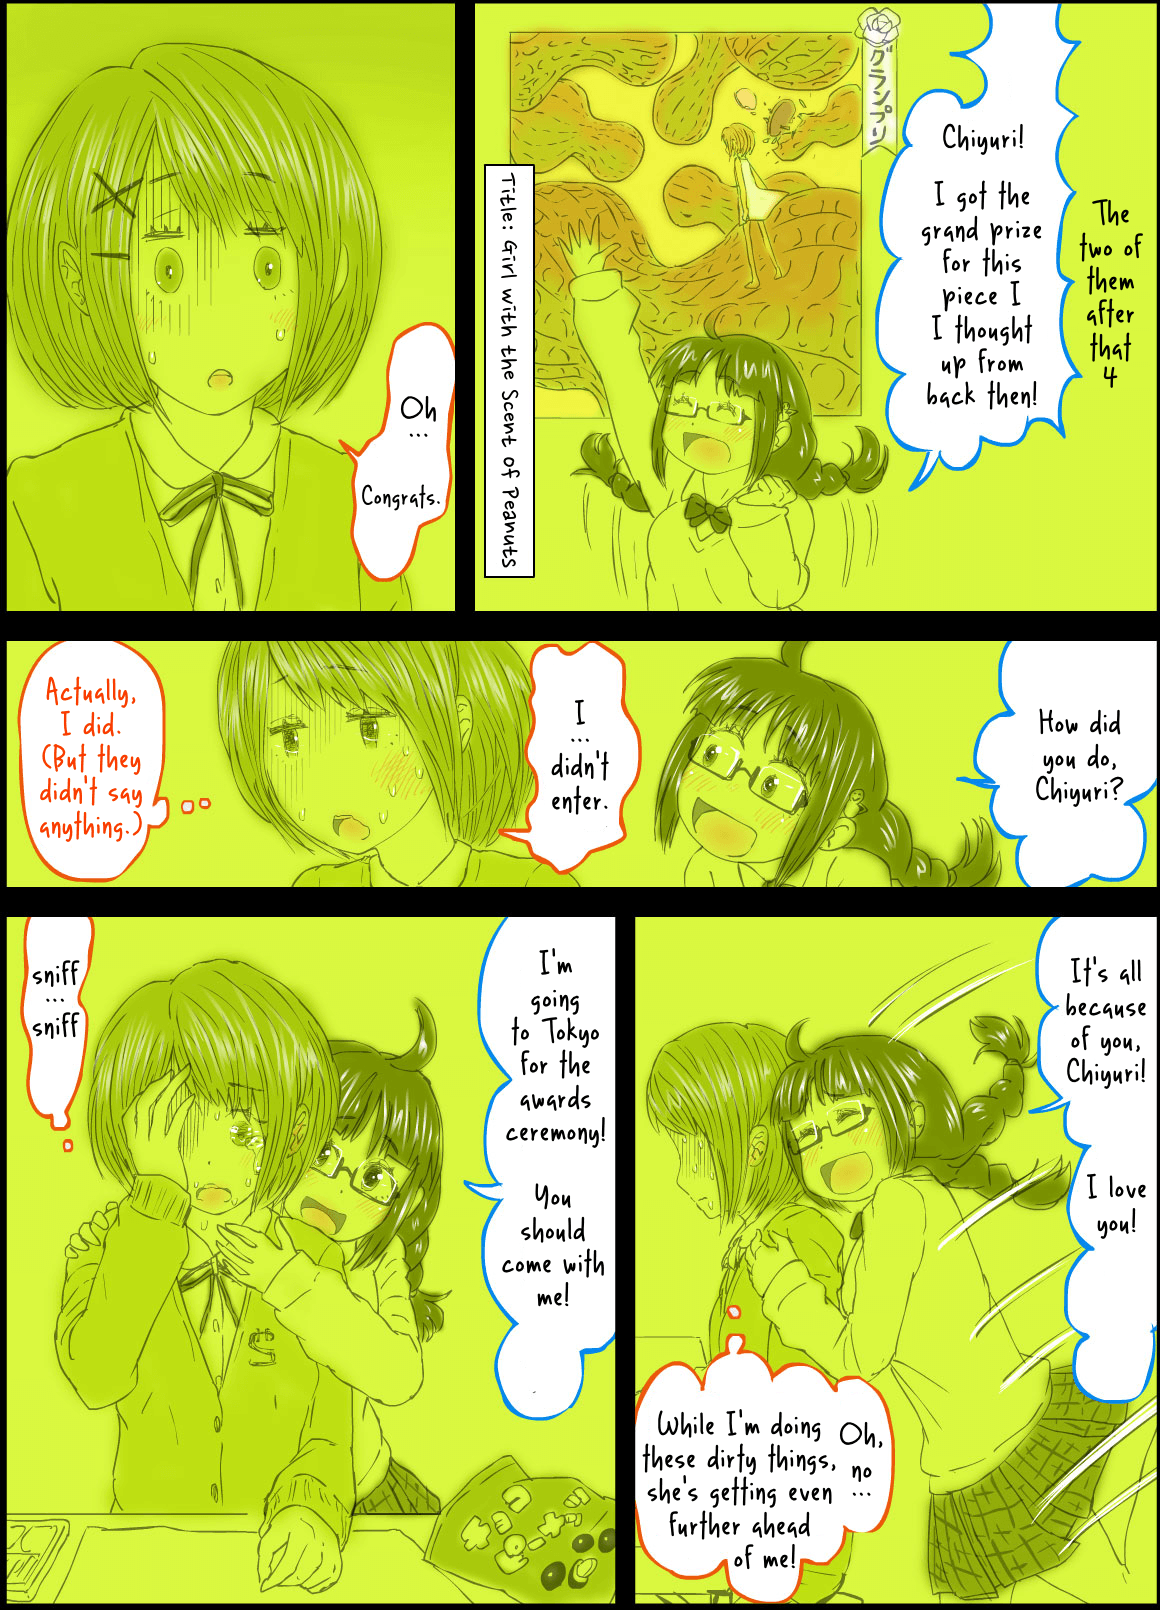 [Homura Hinase] Peanut Butter Lotion -After Days- [English] [Yuri-ism] [保村日生] Peanut Butter Lotion -After Days- [英訳]